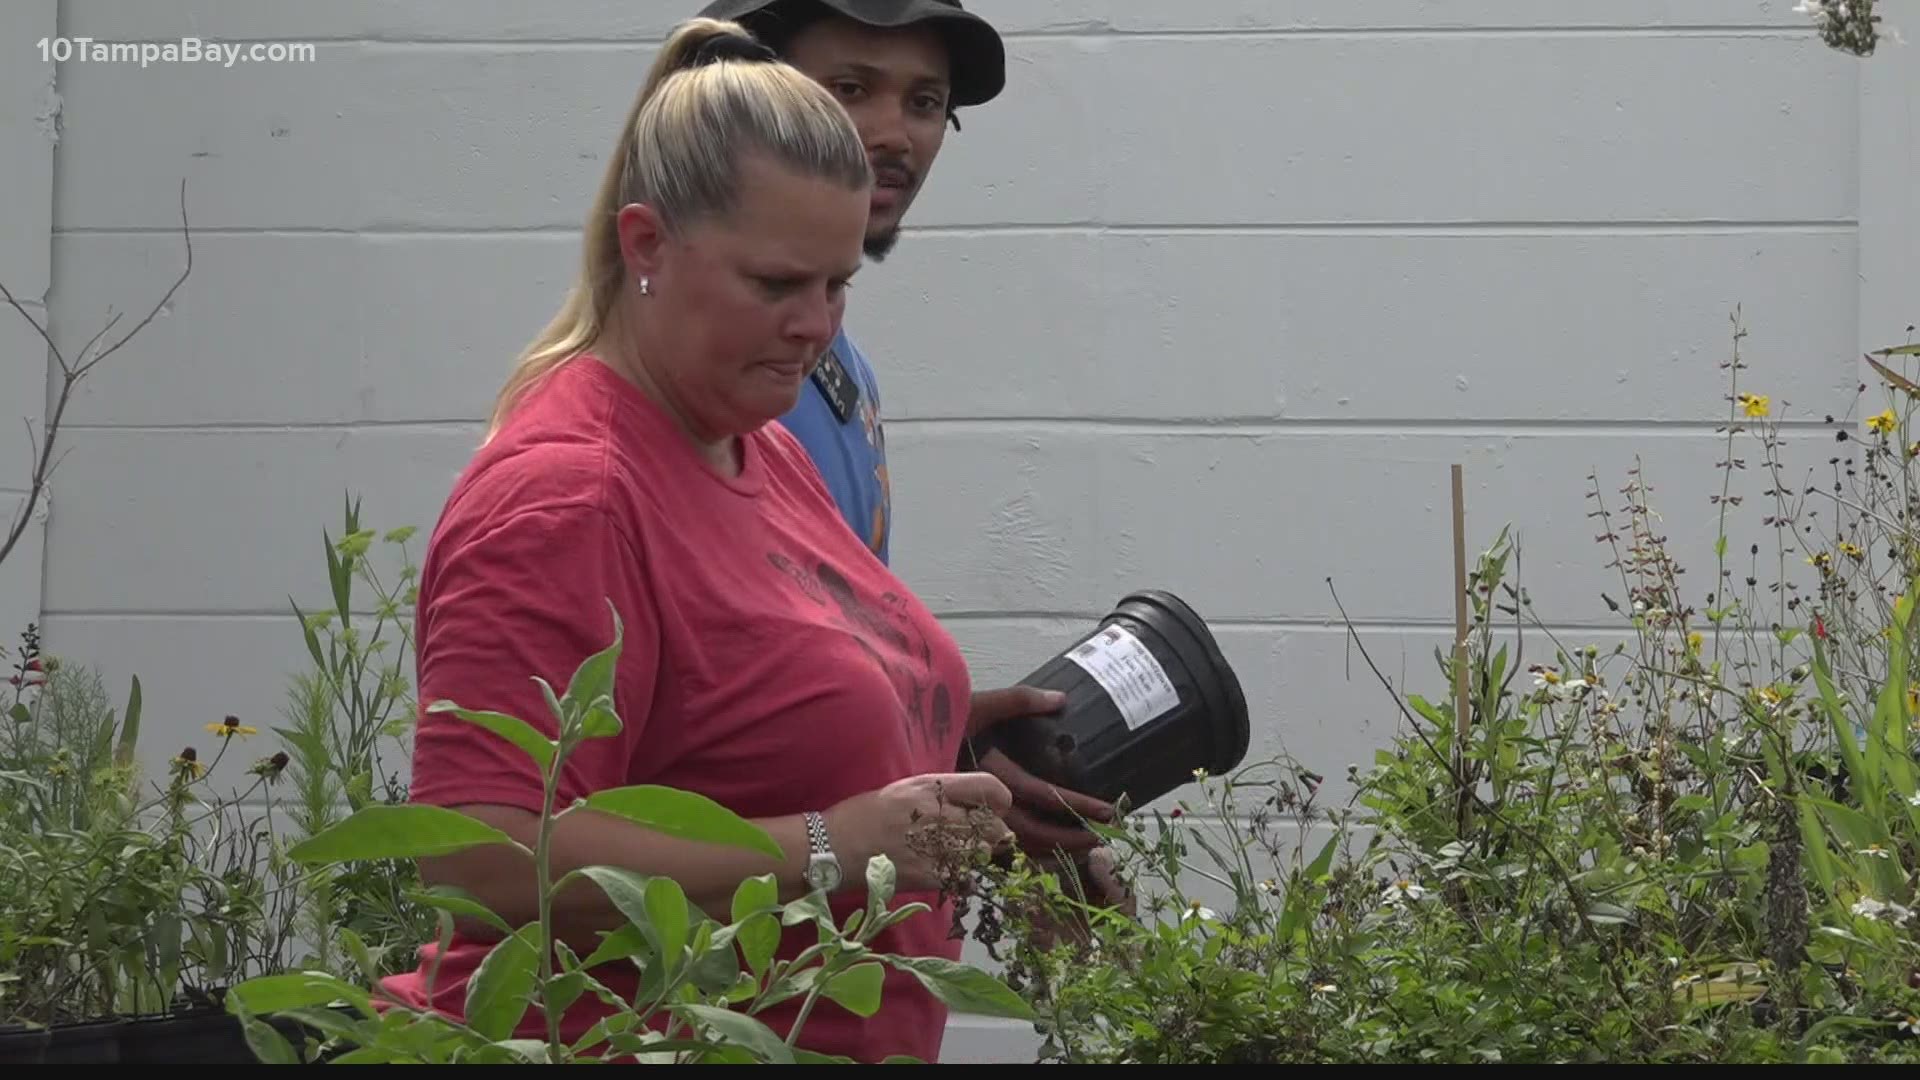 Anita Camacho has spent almost 30 years as an accountant, but her dream is to open a butterfly conservatory in South Tampa behind her nursery.